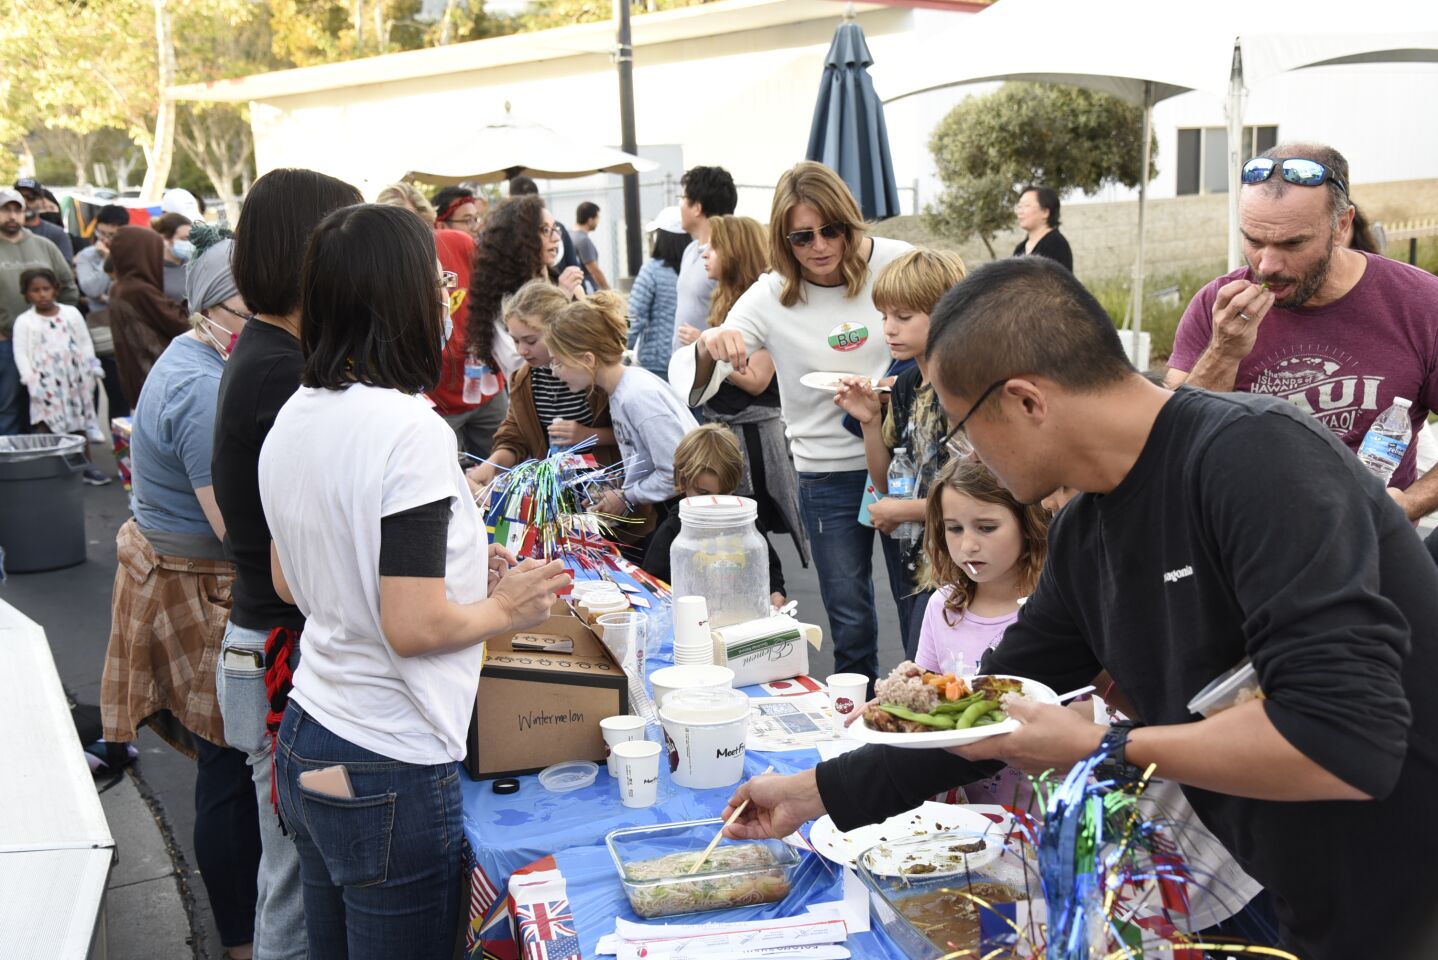 Families brought many of their delicacies to share with others